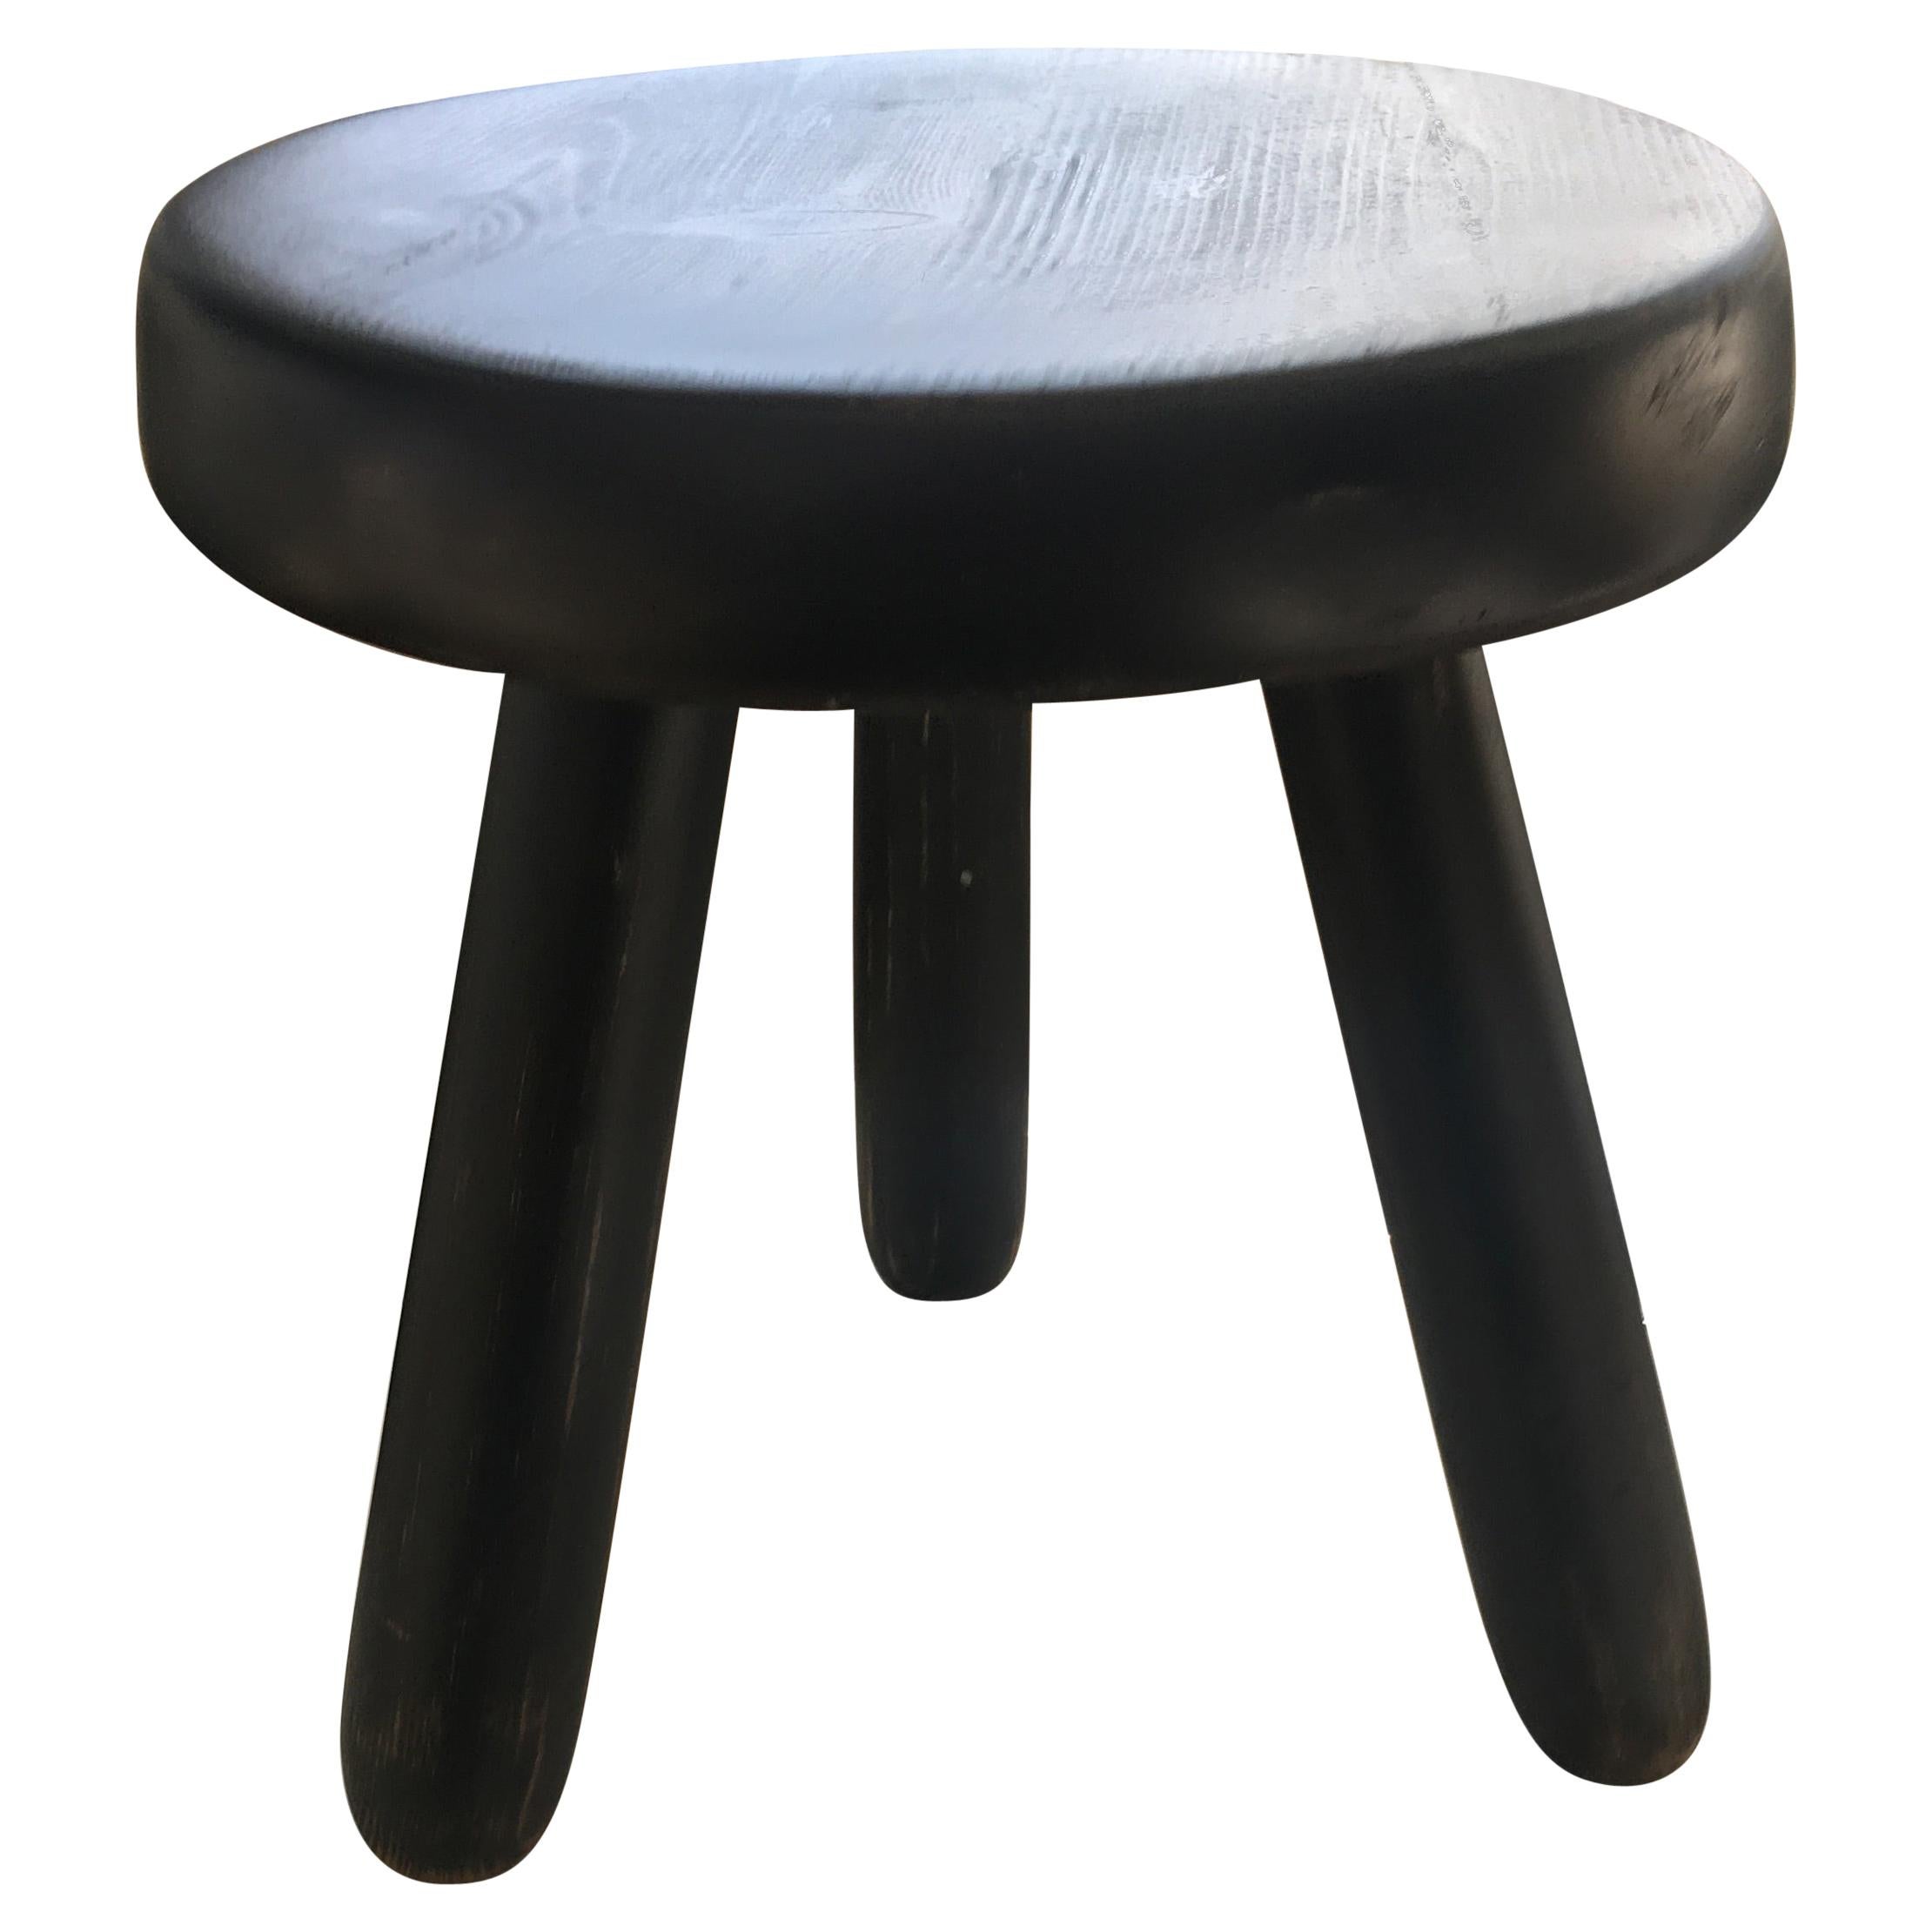 Berger Stool by Charlotte Perriand